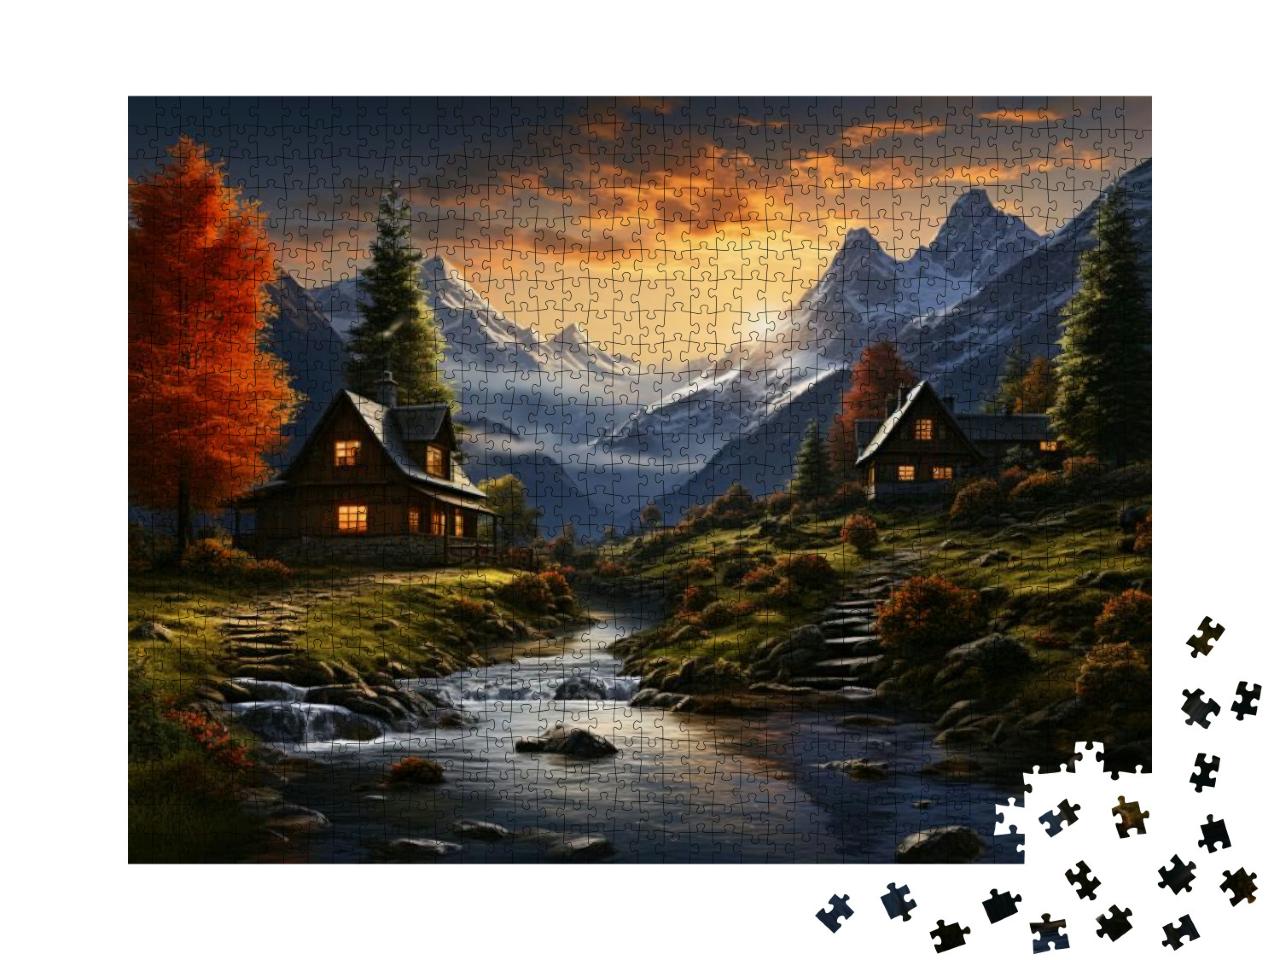 Cozy Foothill Cabins Jigsaw Puzzle with 1000 pieces